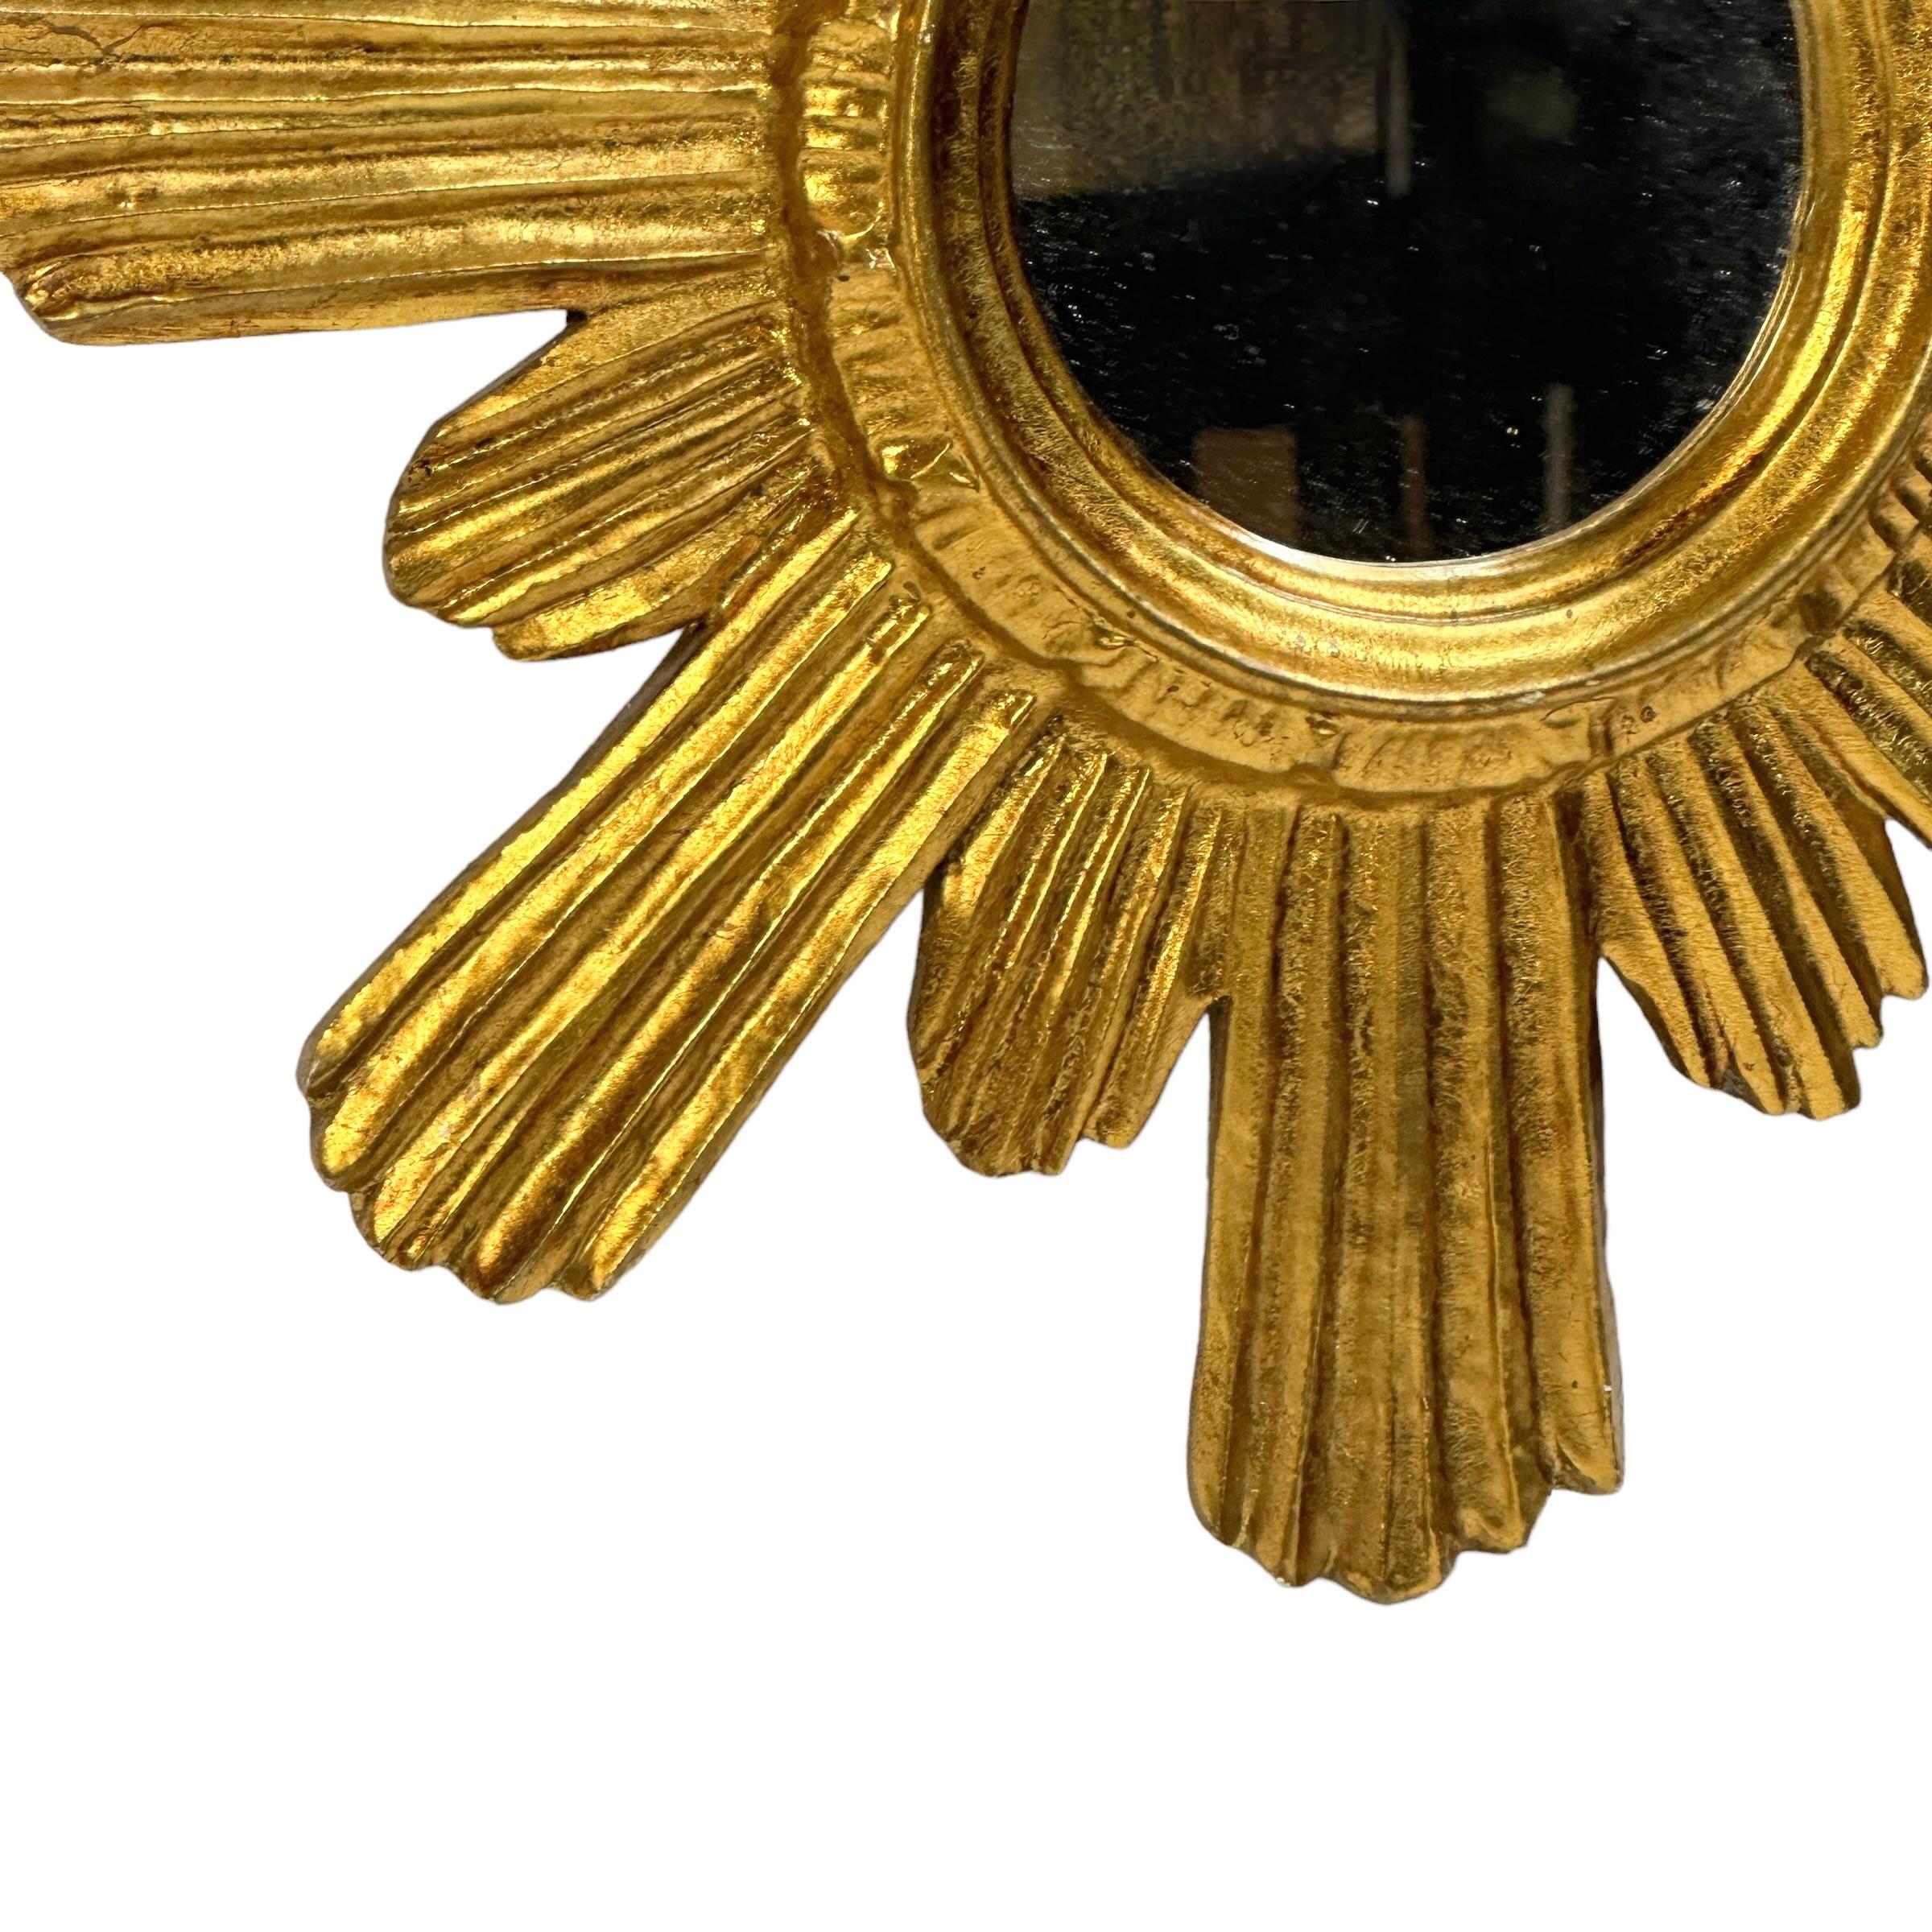 A gorgeous starburst mirror. Made of gilded wood and stucco. No chips, no cracks, no repairs. It measures approximate: 14.5